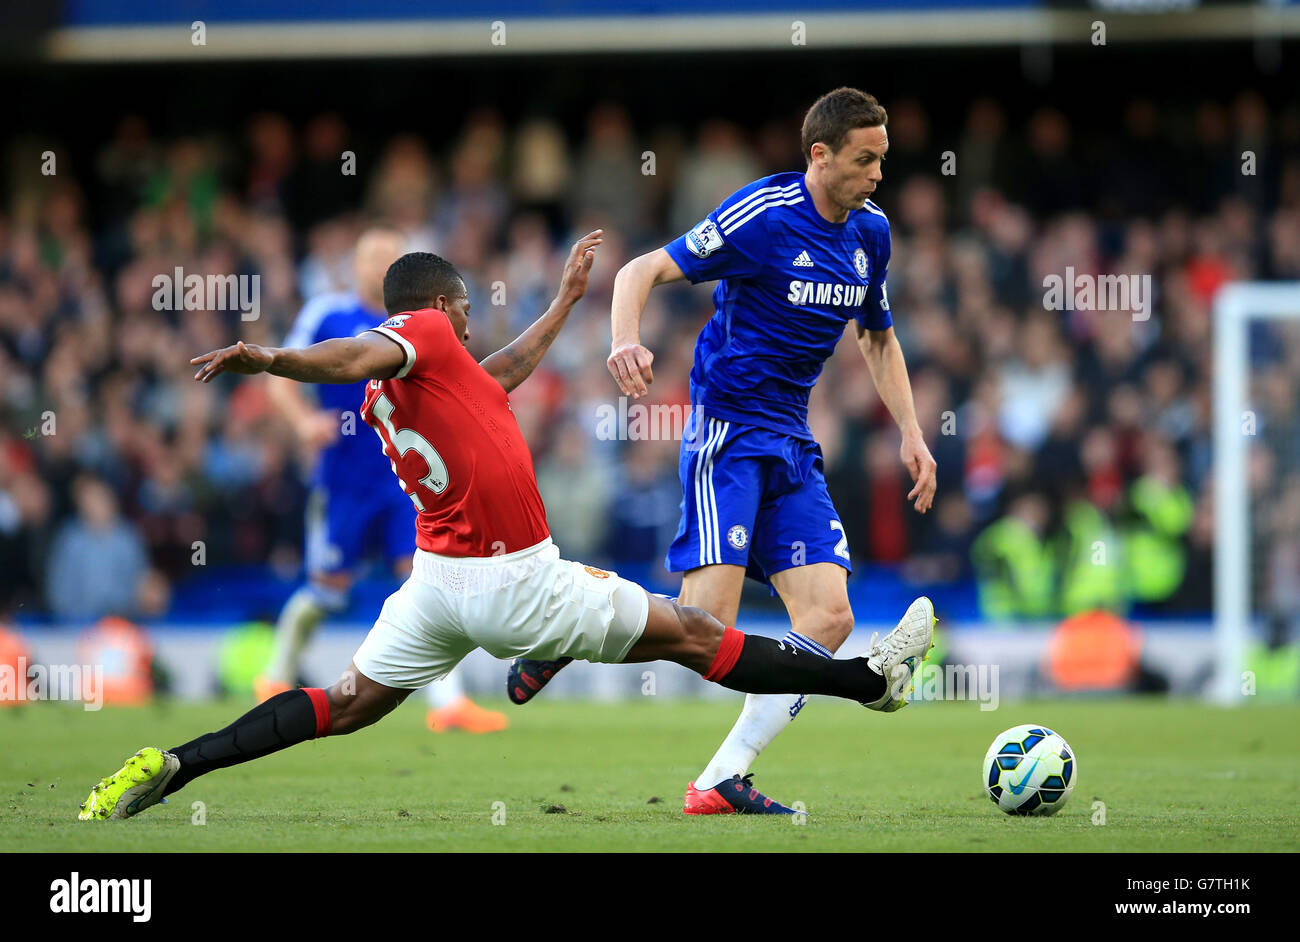 Manchester United's Antonio Valencia (left) and Chelsea's Nemanja Matic (right) battle for the ball during the Barclays Premier League match at Stamford Bridge, London. PRESS ASSOCIATION Photo. Picture date: Saturday April 18, 2015. See PA story SOCCER Chelsea. Photo credit should read: Nick Potts/PA Wire. Stock Photo